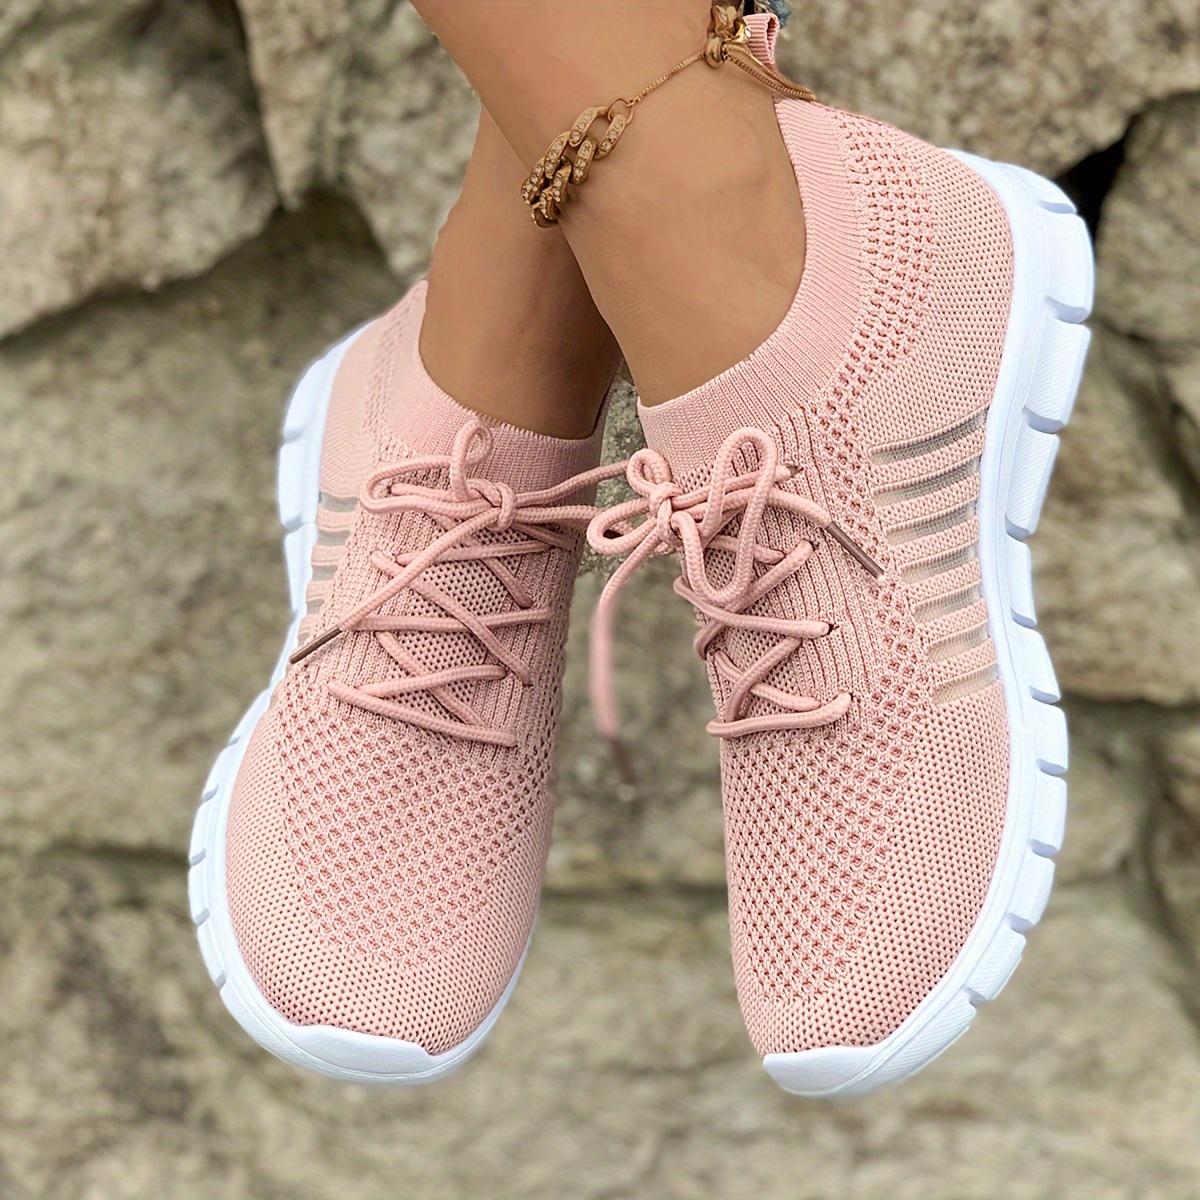 mesh sneakers women s knit lightweight breathable mesh lace details 7